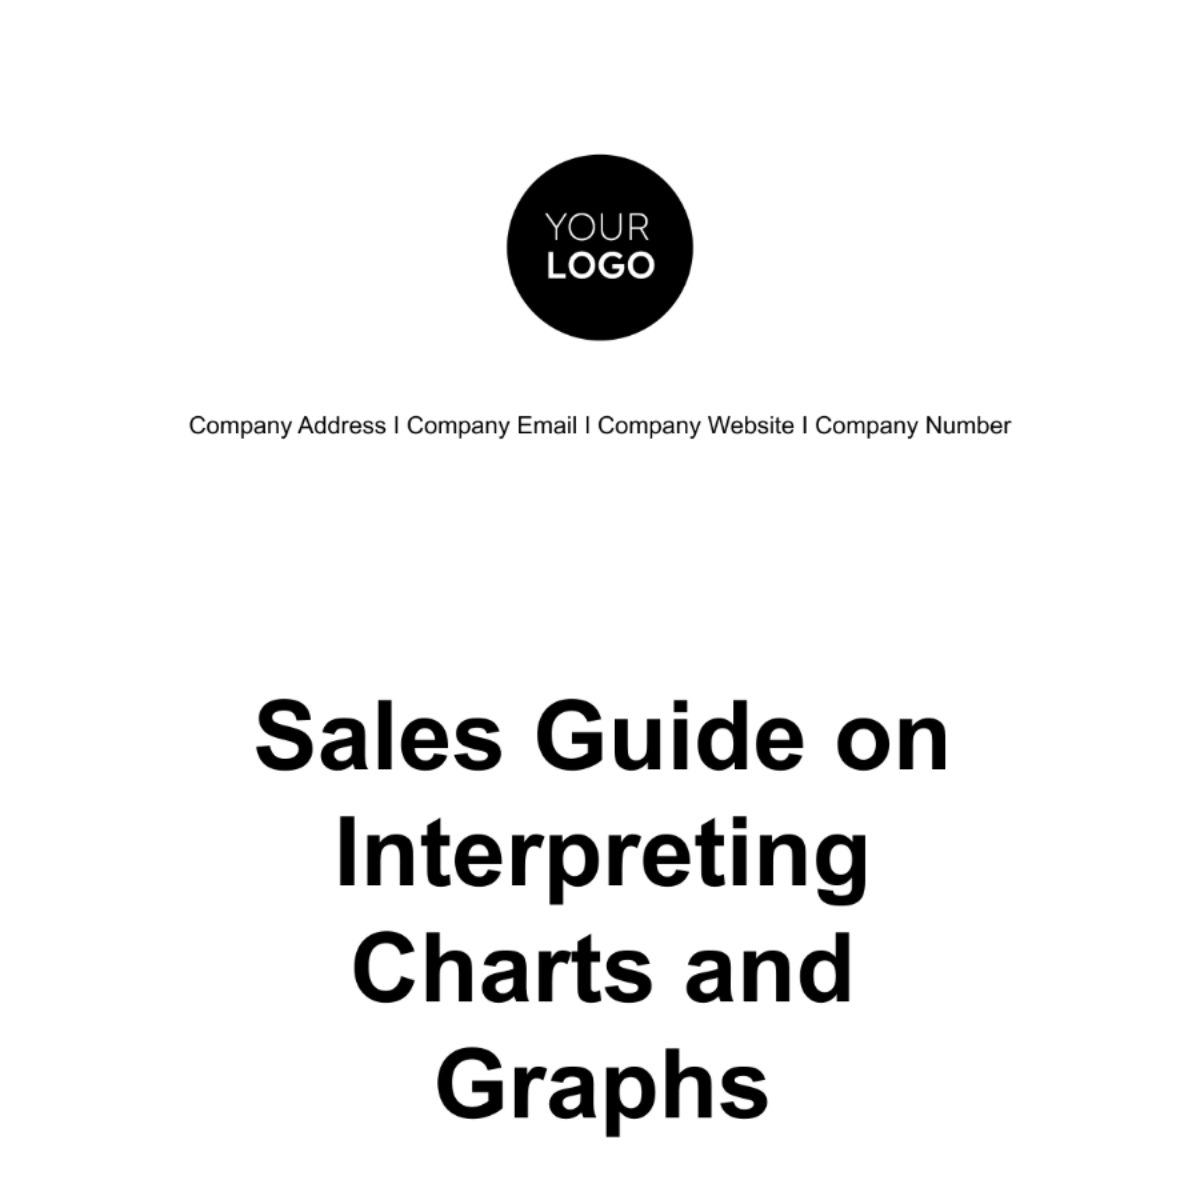 Sales Guide on Interpreting Charts and Graphs Template